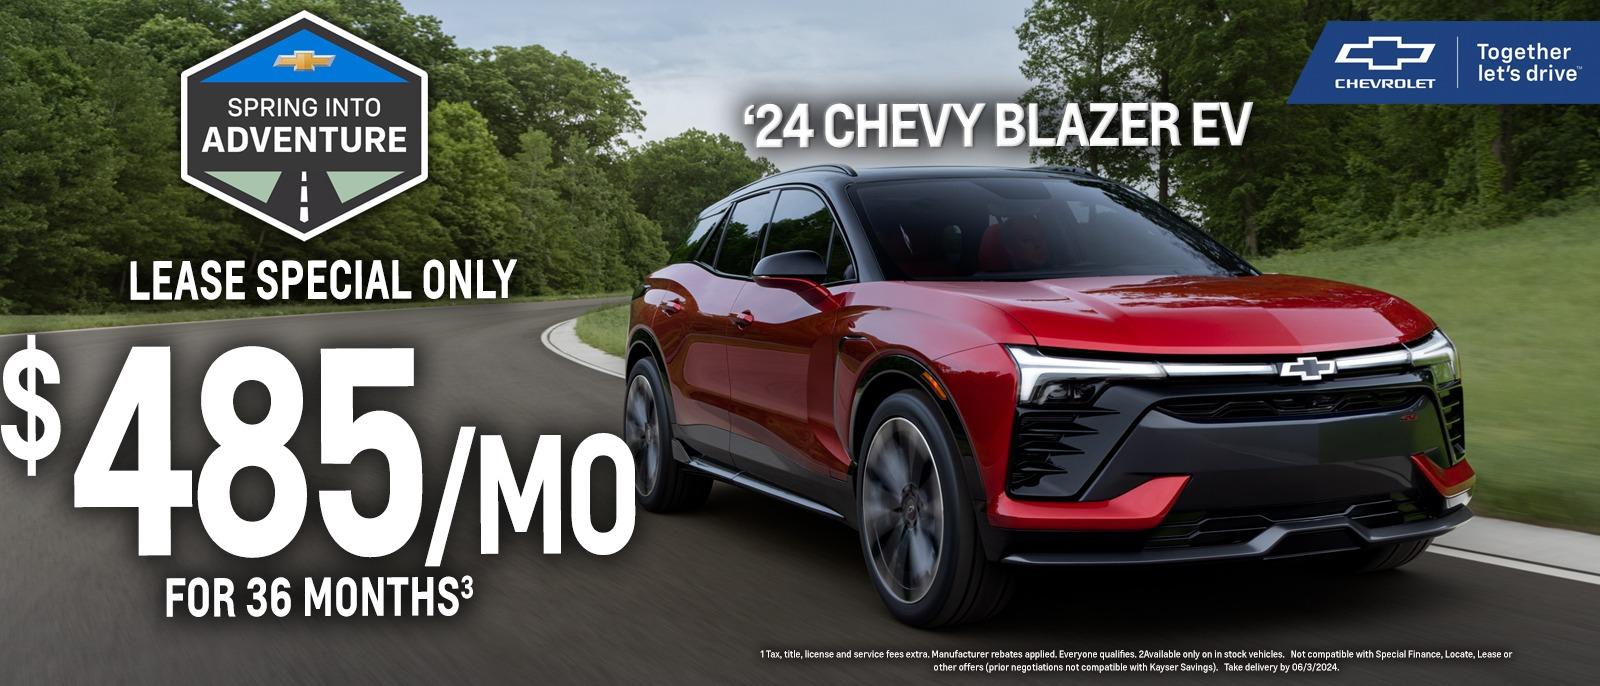 24 CHEVY BLAZER EV LEASE SPECIAL ONLY $485/MO FOR 36 MONTH